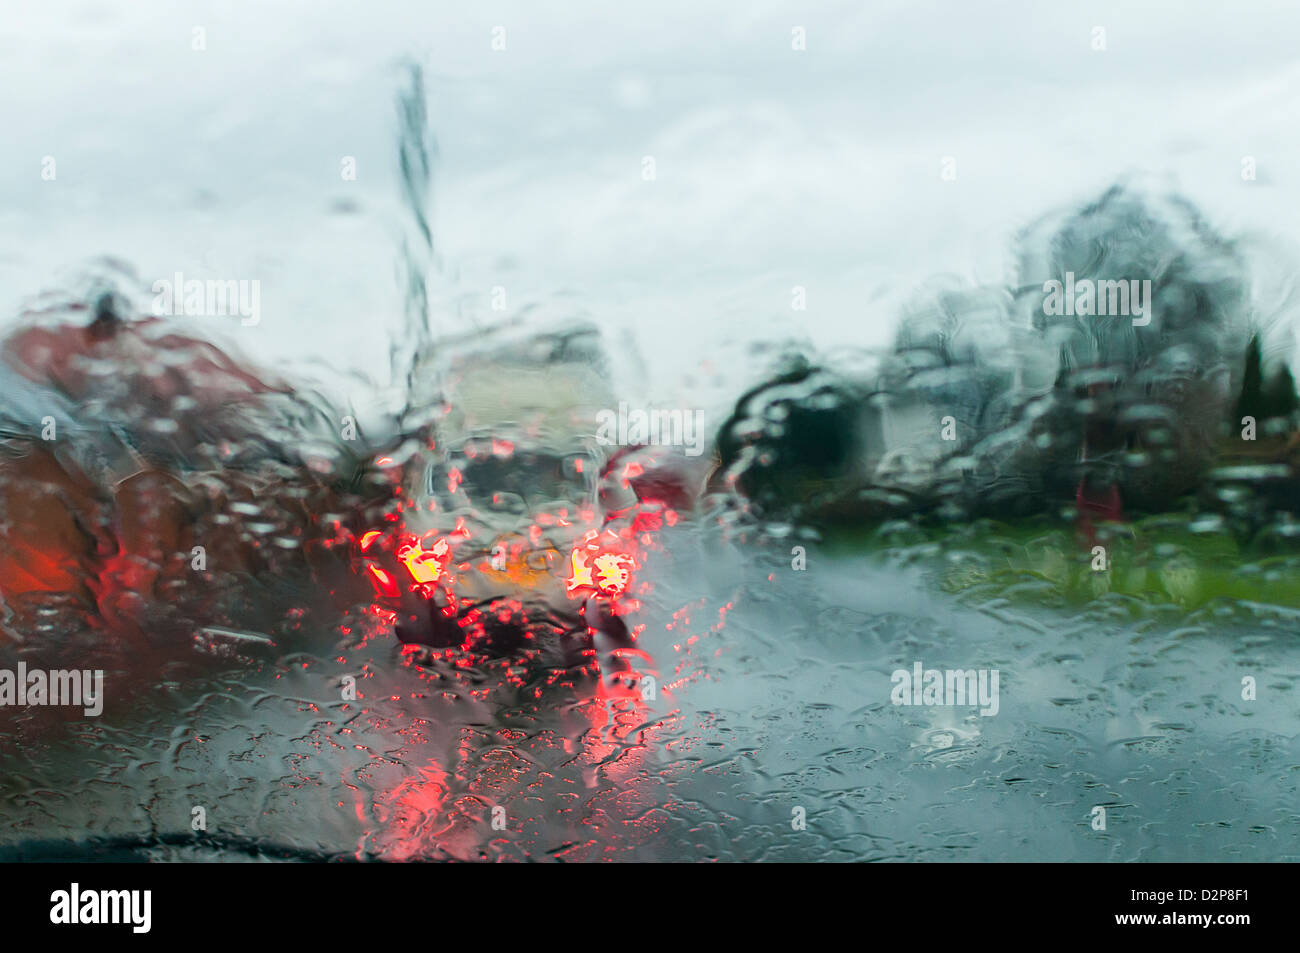 car windscreen wet weather poor driving conditions lancashire england uk europe driving poor visibility poor visibility braking Stock Photo